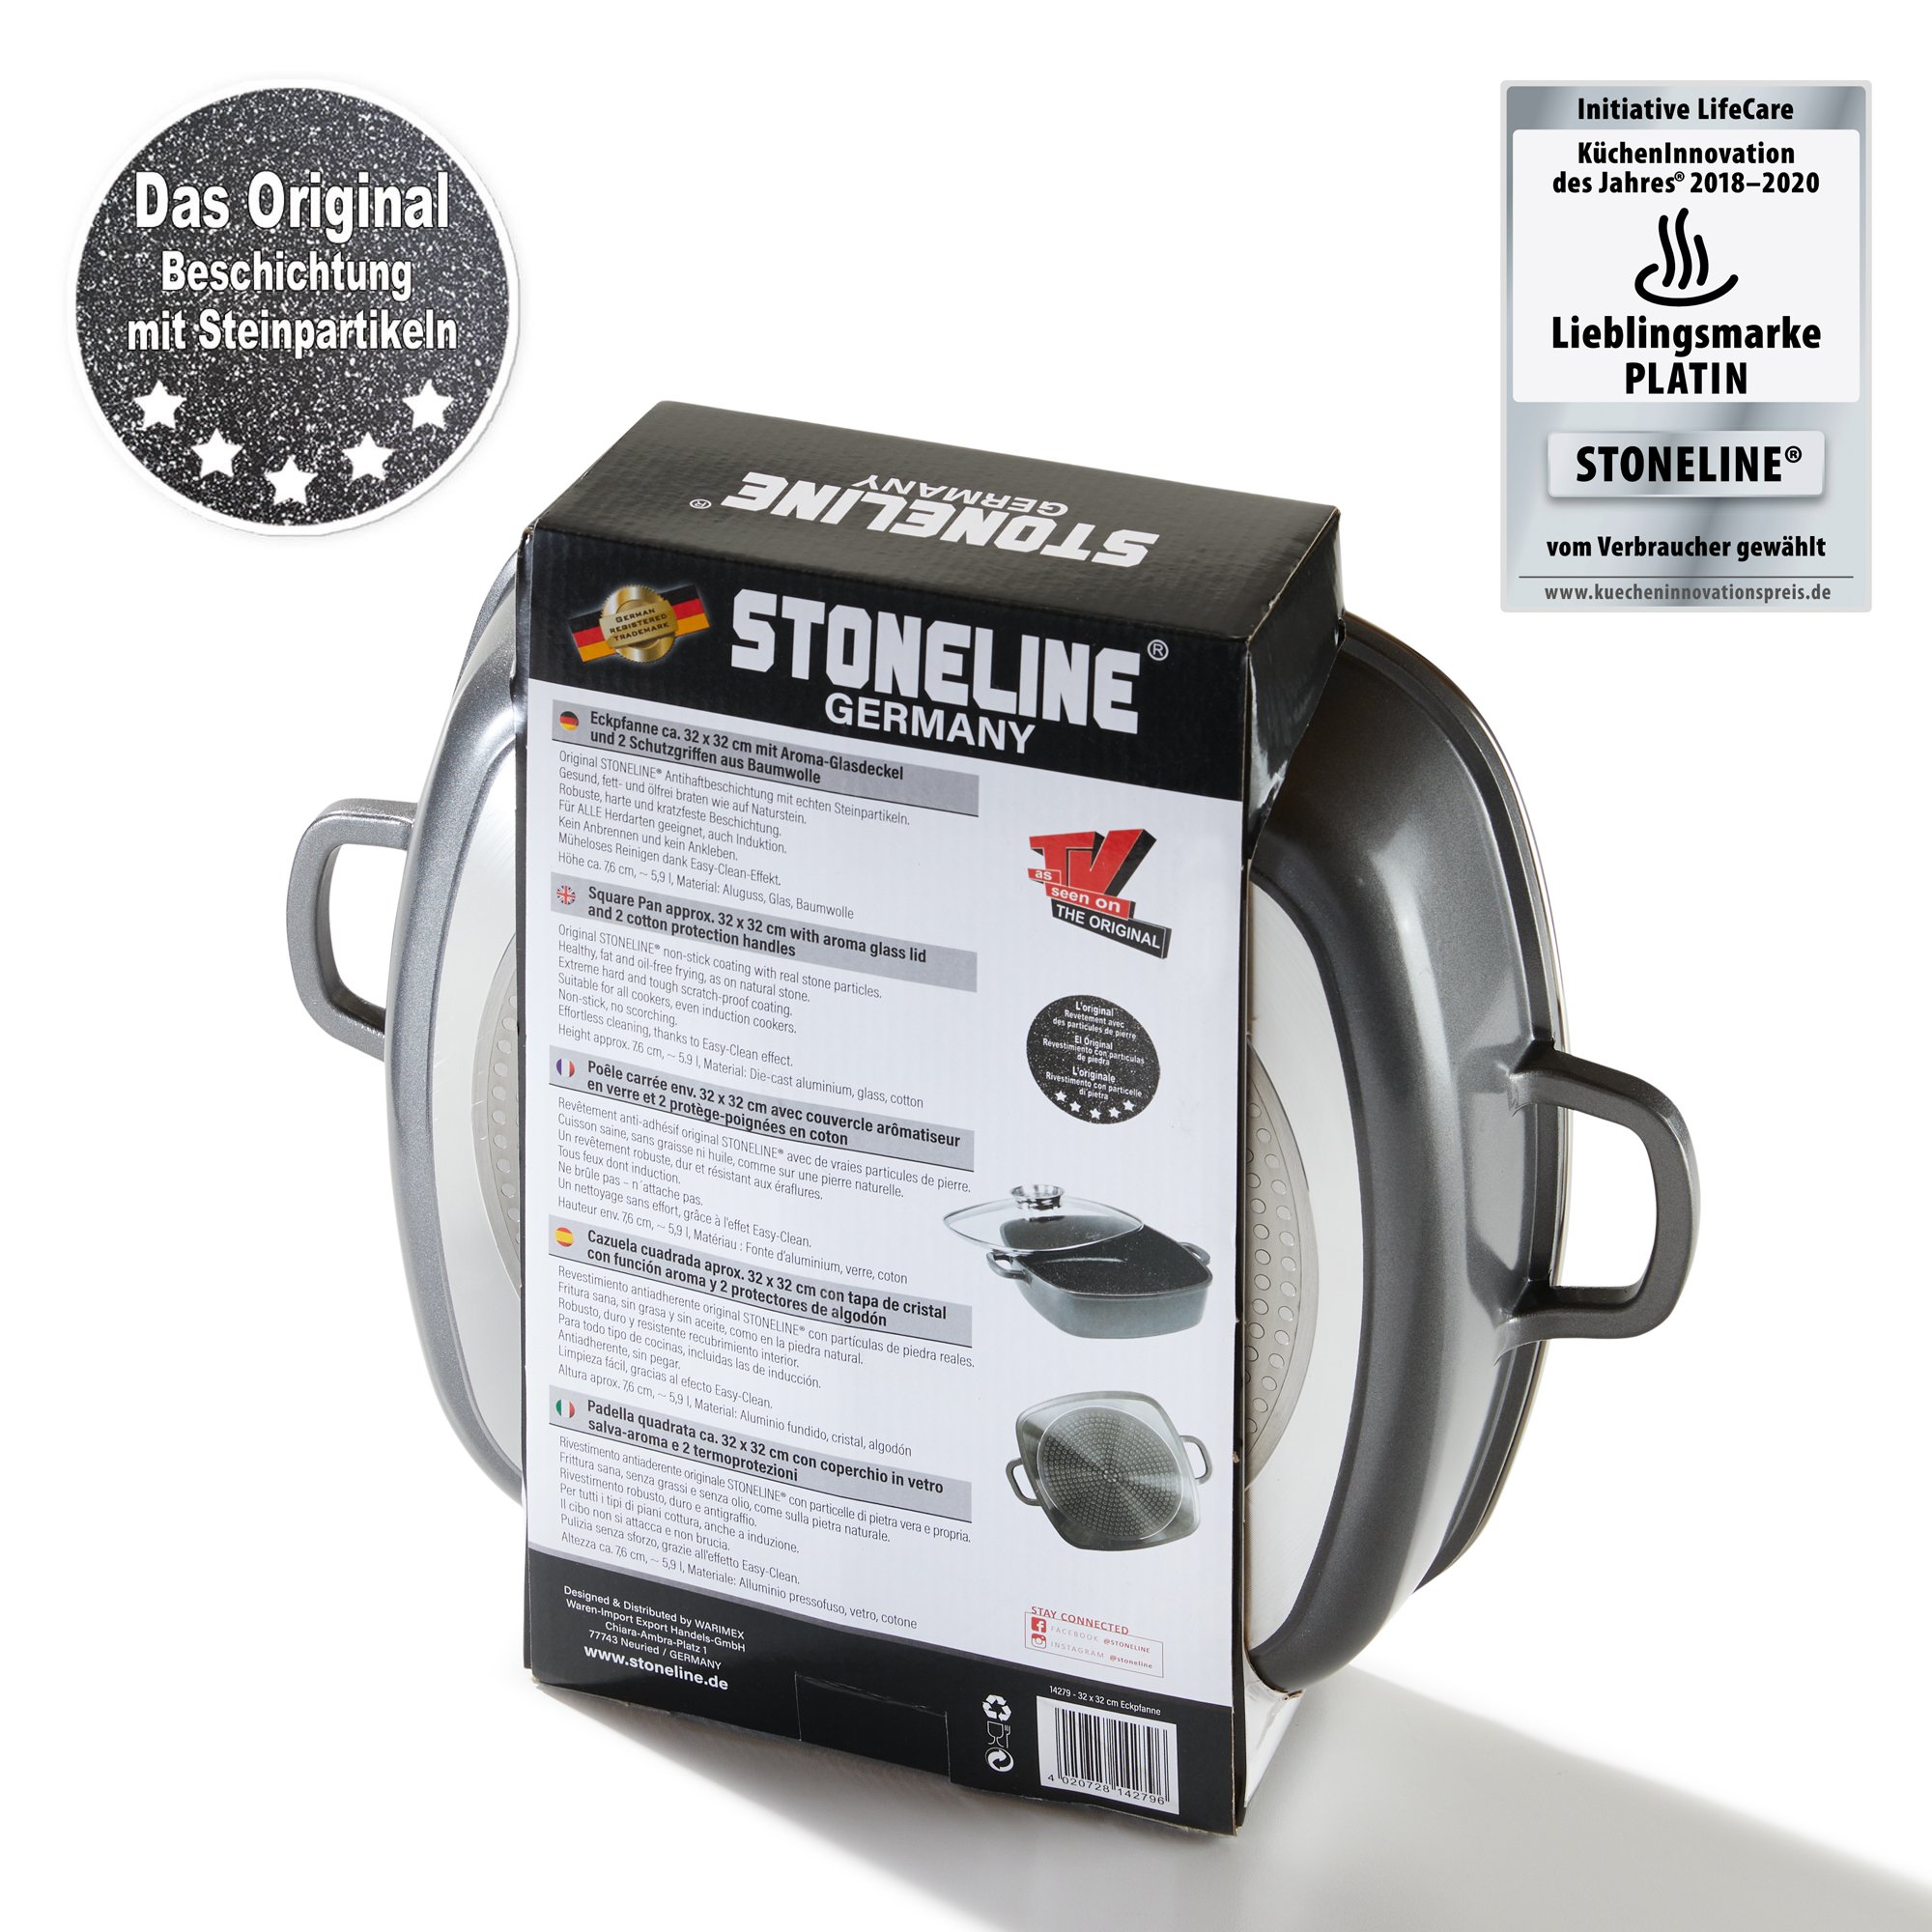 STONELINE® Square Serving Pan 32 cm, with Aroma Lid, Non-Stick Pan Casserole Dish